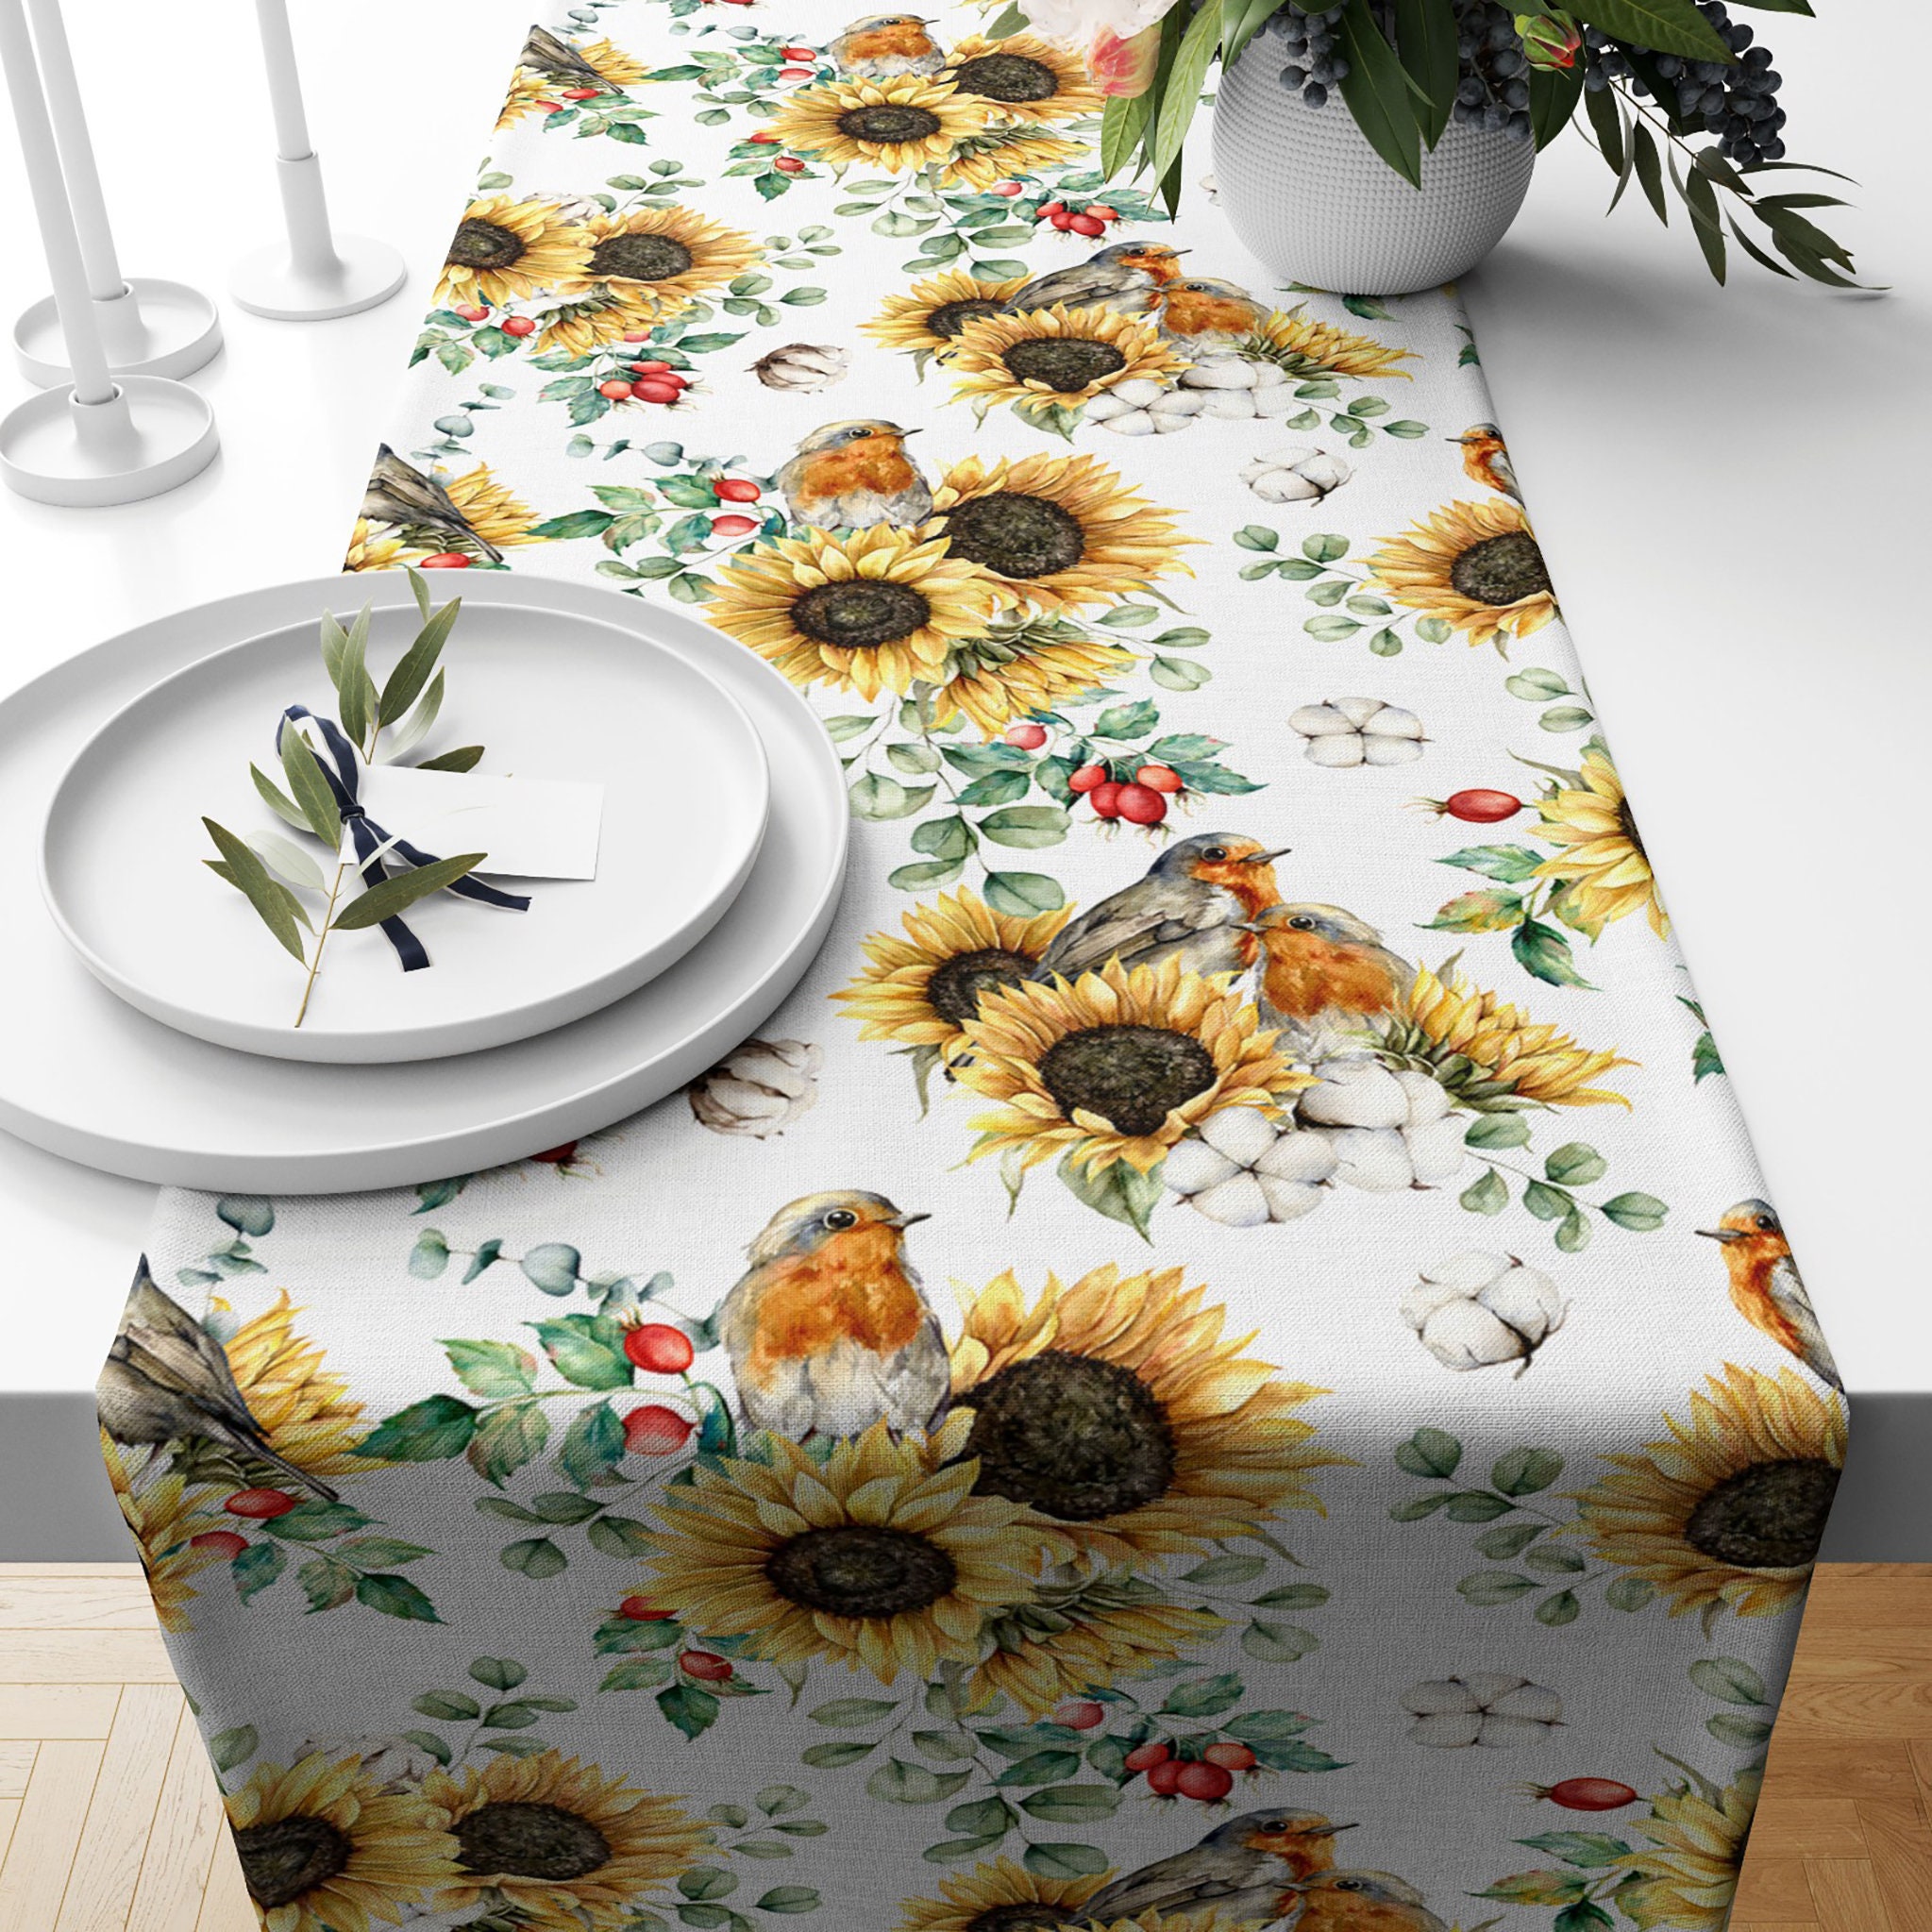 Sunflower Themed Table Runner Floral Tablecloth Table | Etsy